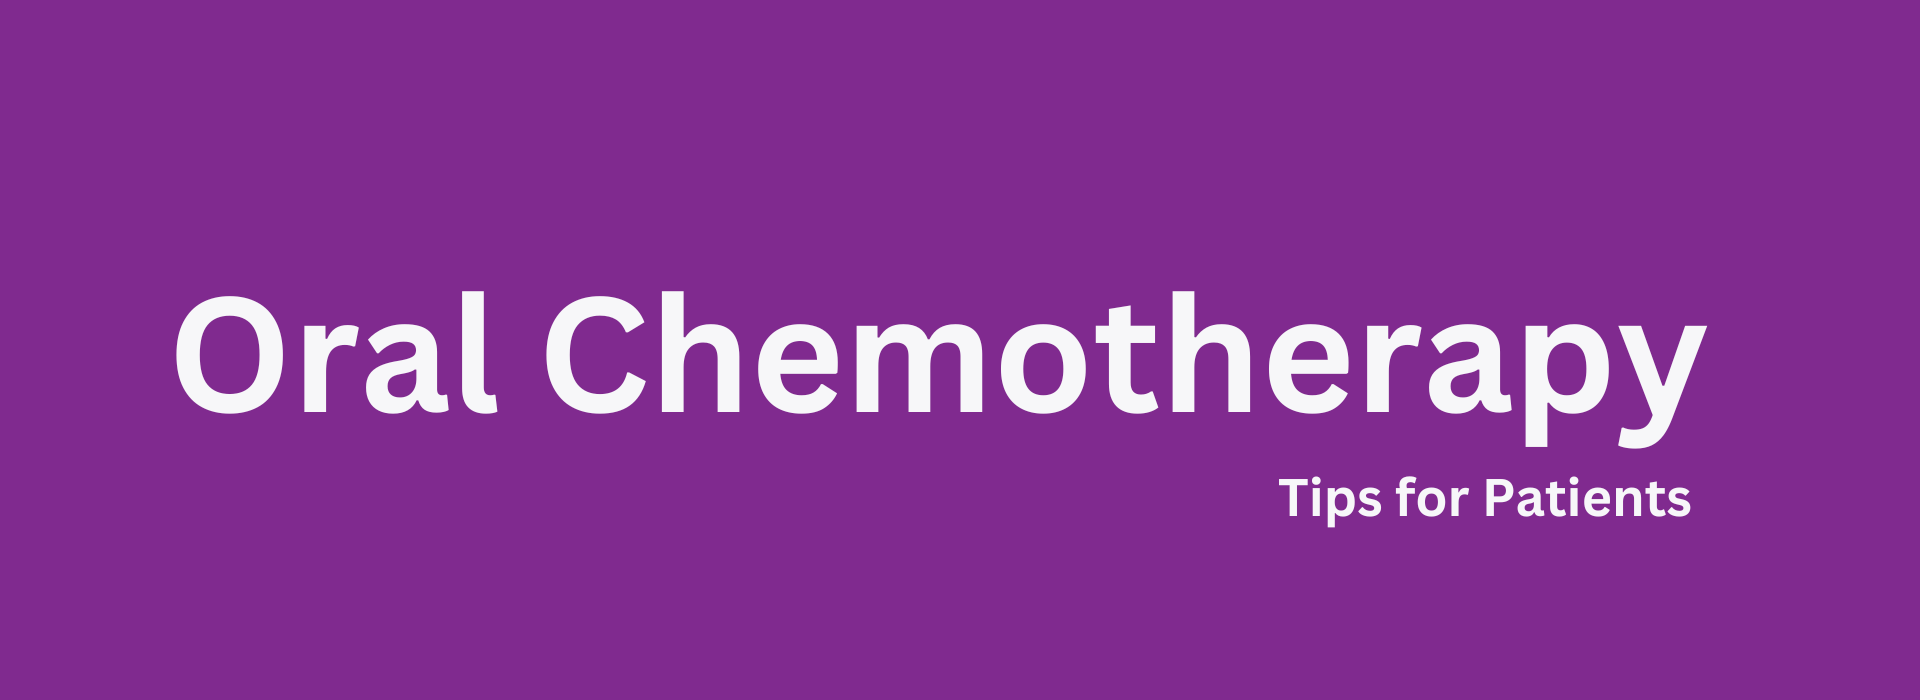 Managing Side Effects of Oral Chemotherapy: Tips for Patients